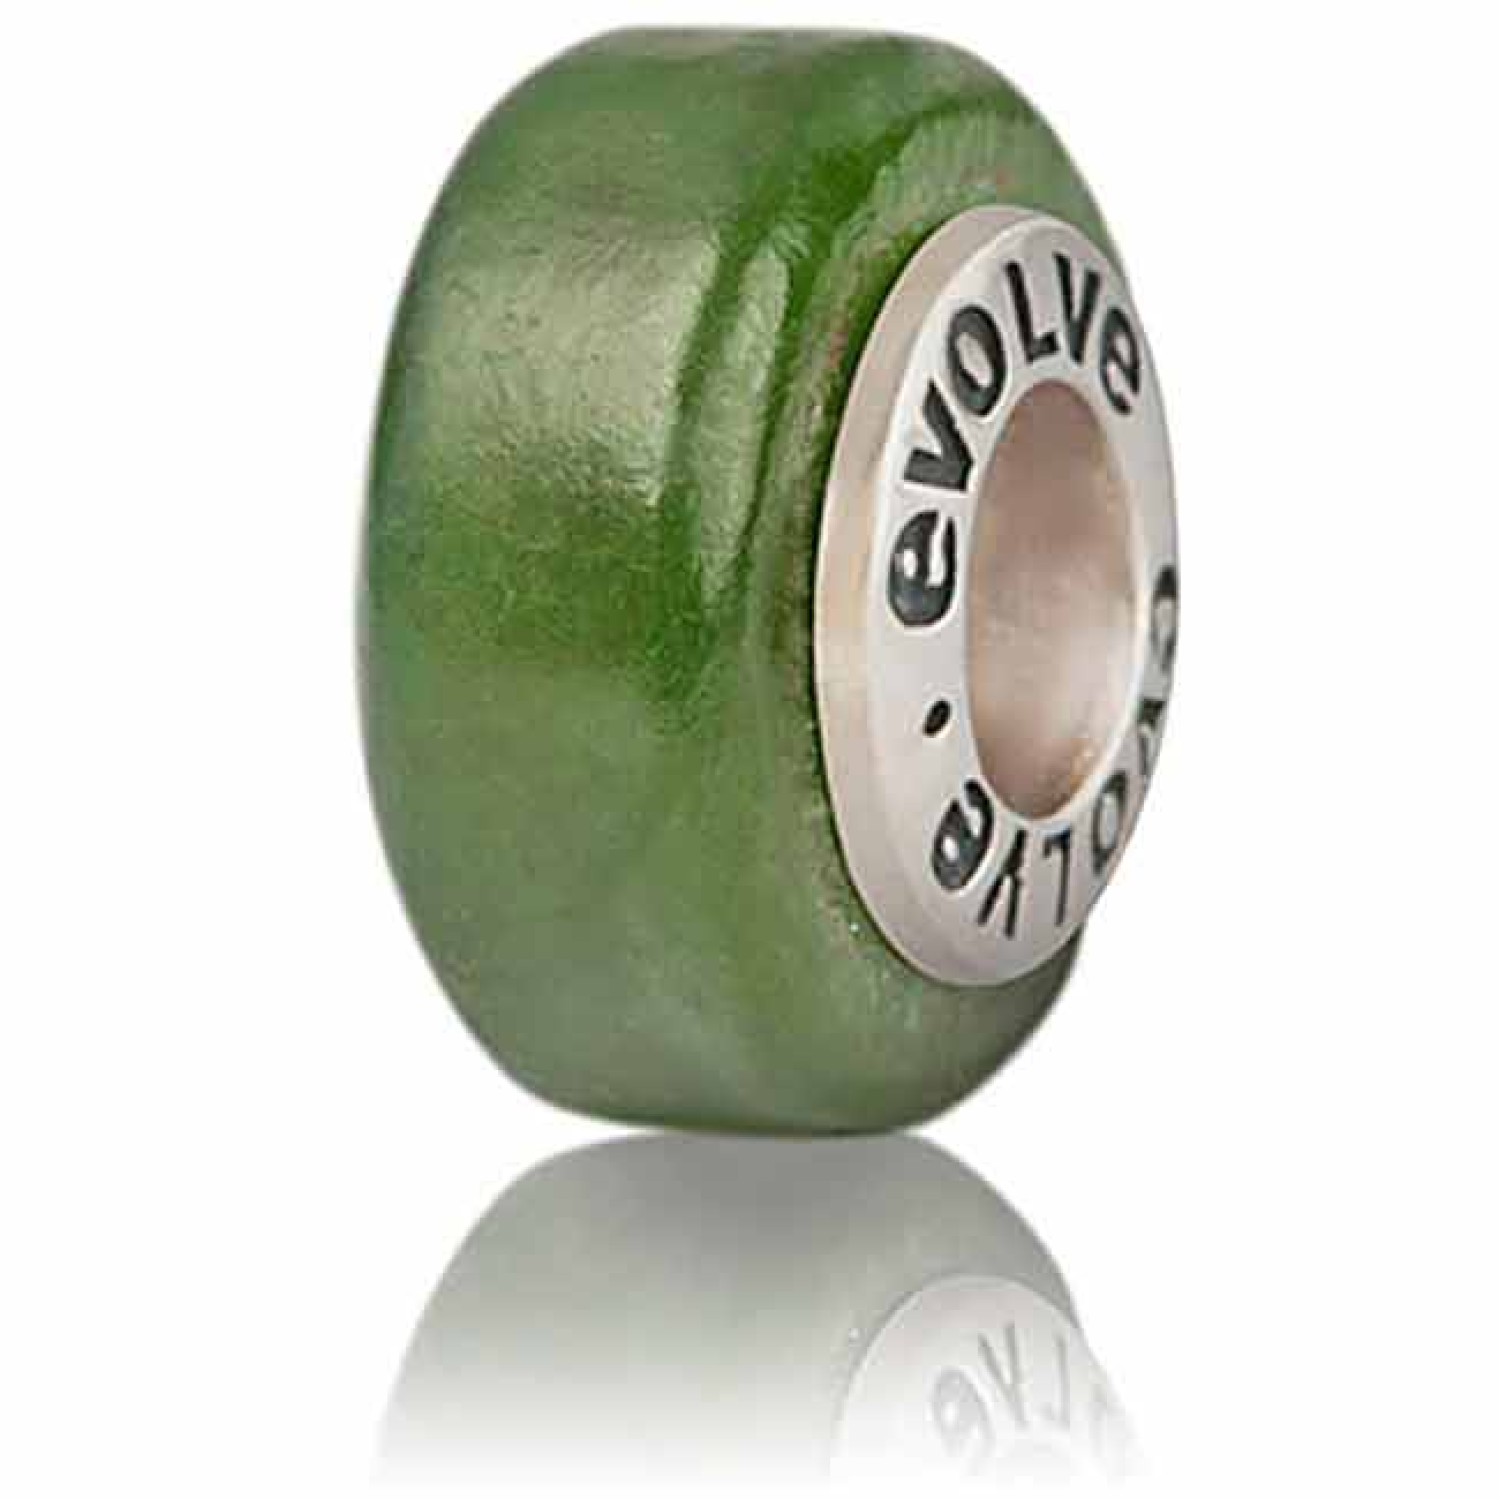 Evolve NZ Charm Pounamu - Greenstone. The Maori word for greenstone is pounamu. Greenstone is highly valued by the Maori and it plays an important role in their culture. It is considered a treasure. This piece of genuine New Zealand greenstone has come fr